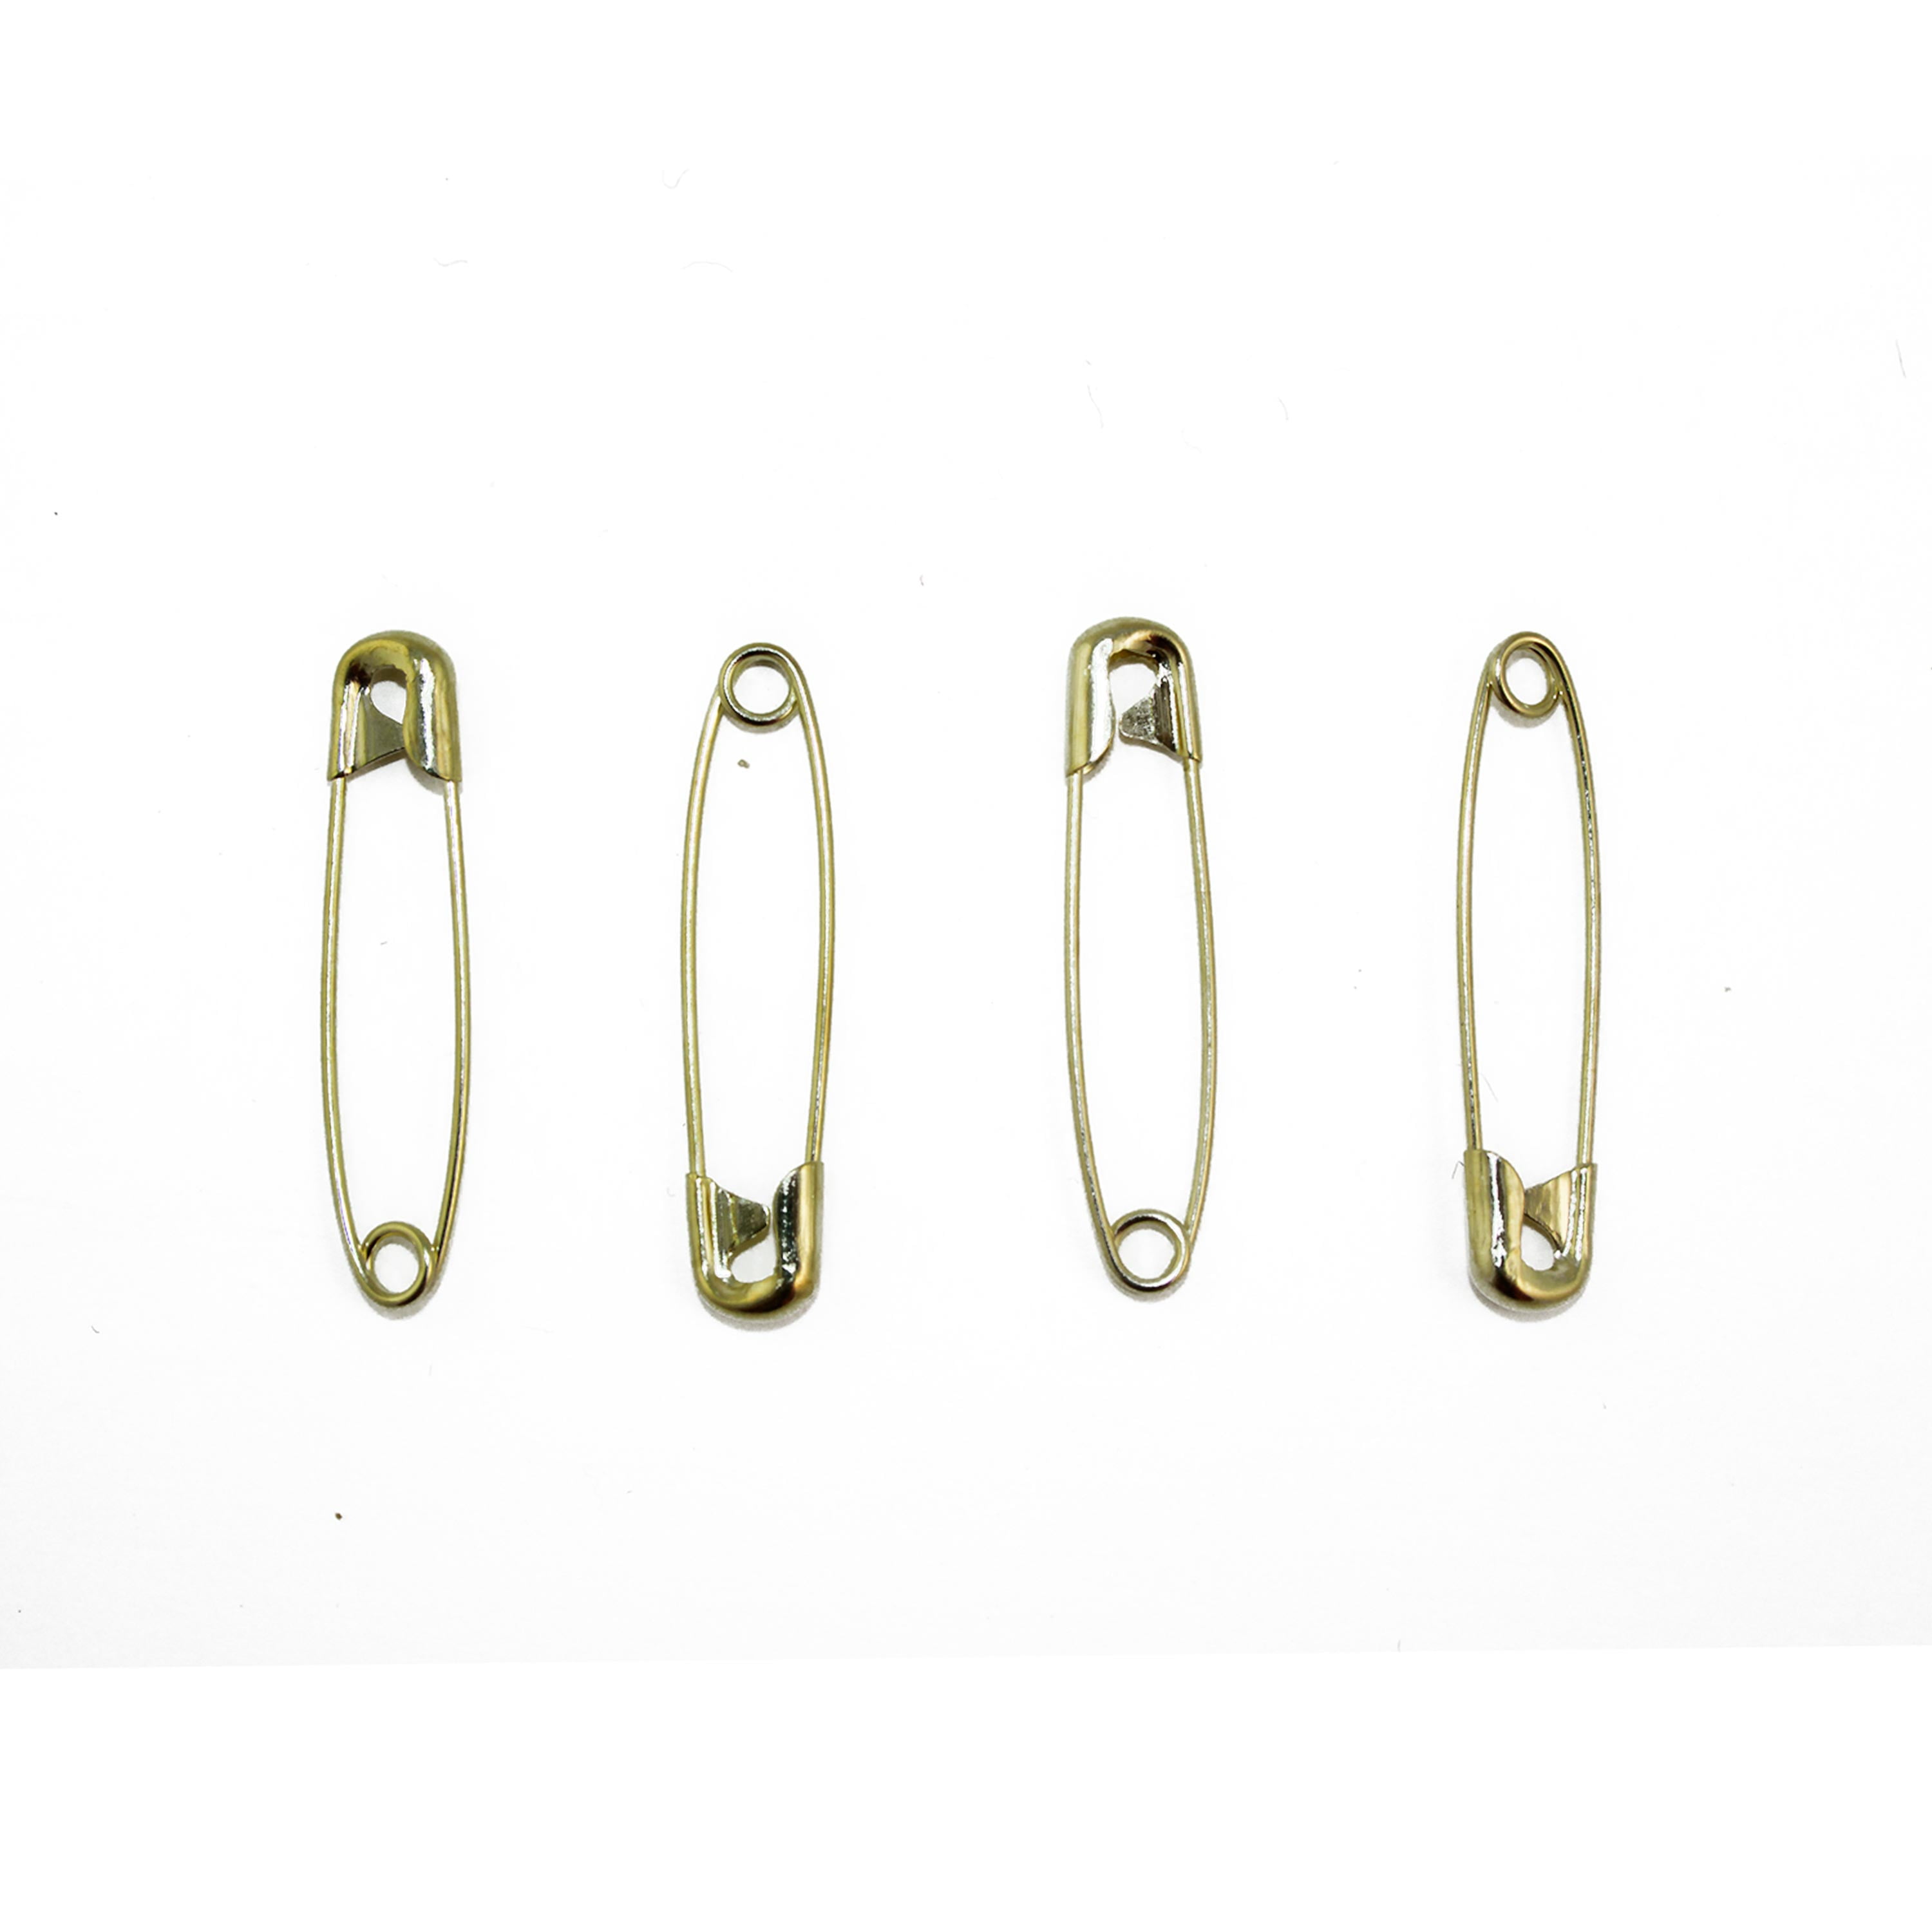 Safety Pins - #1 Small - 144 Per Box (1-4/16 inch) - D5003